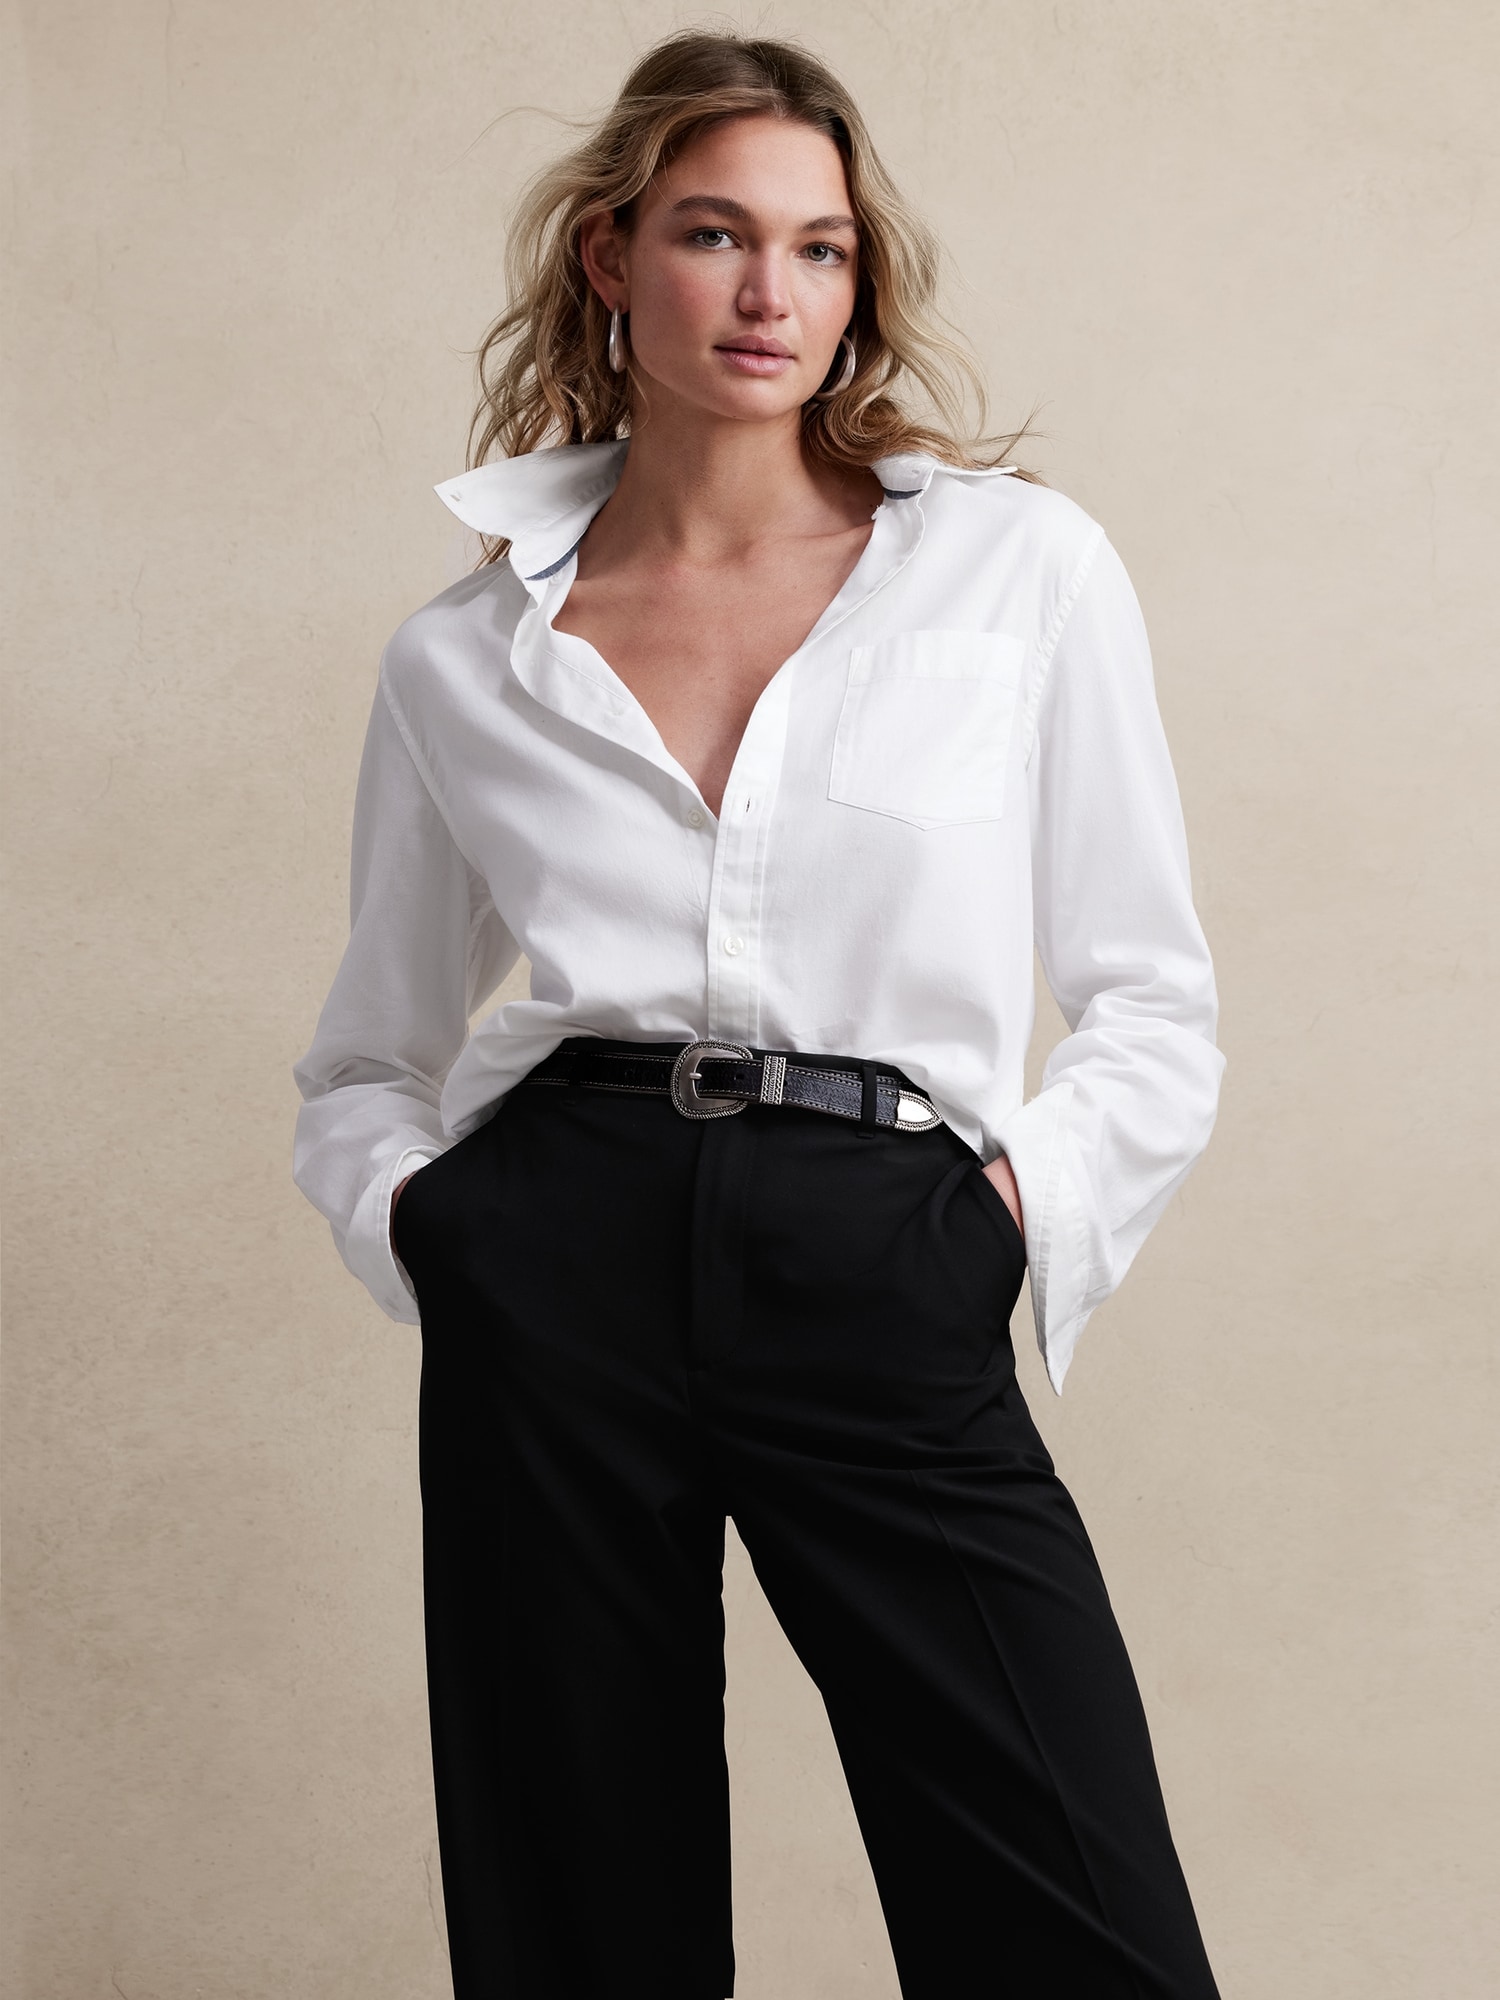 Sculpted Straight Pant